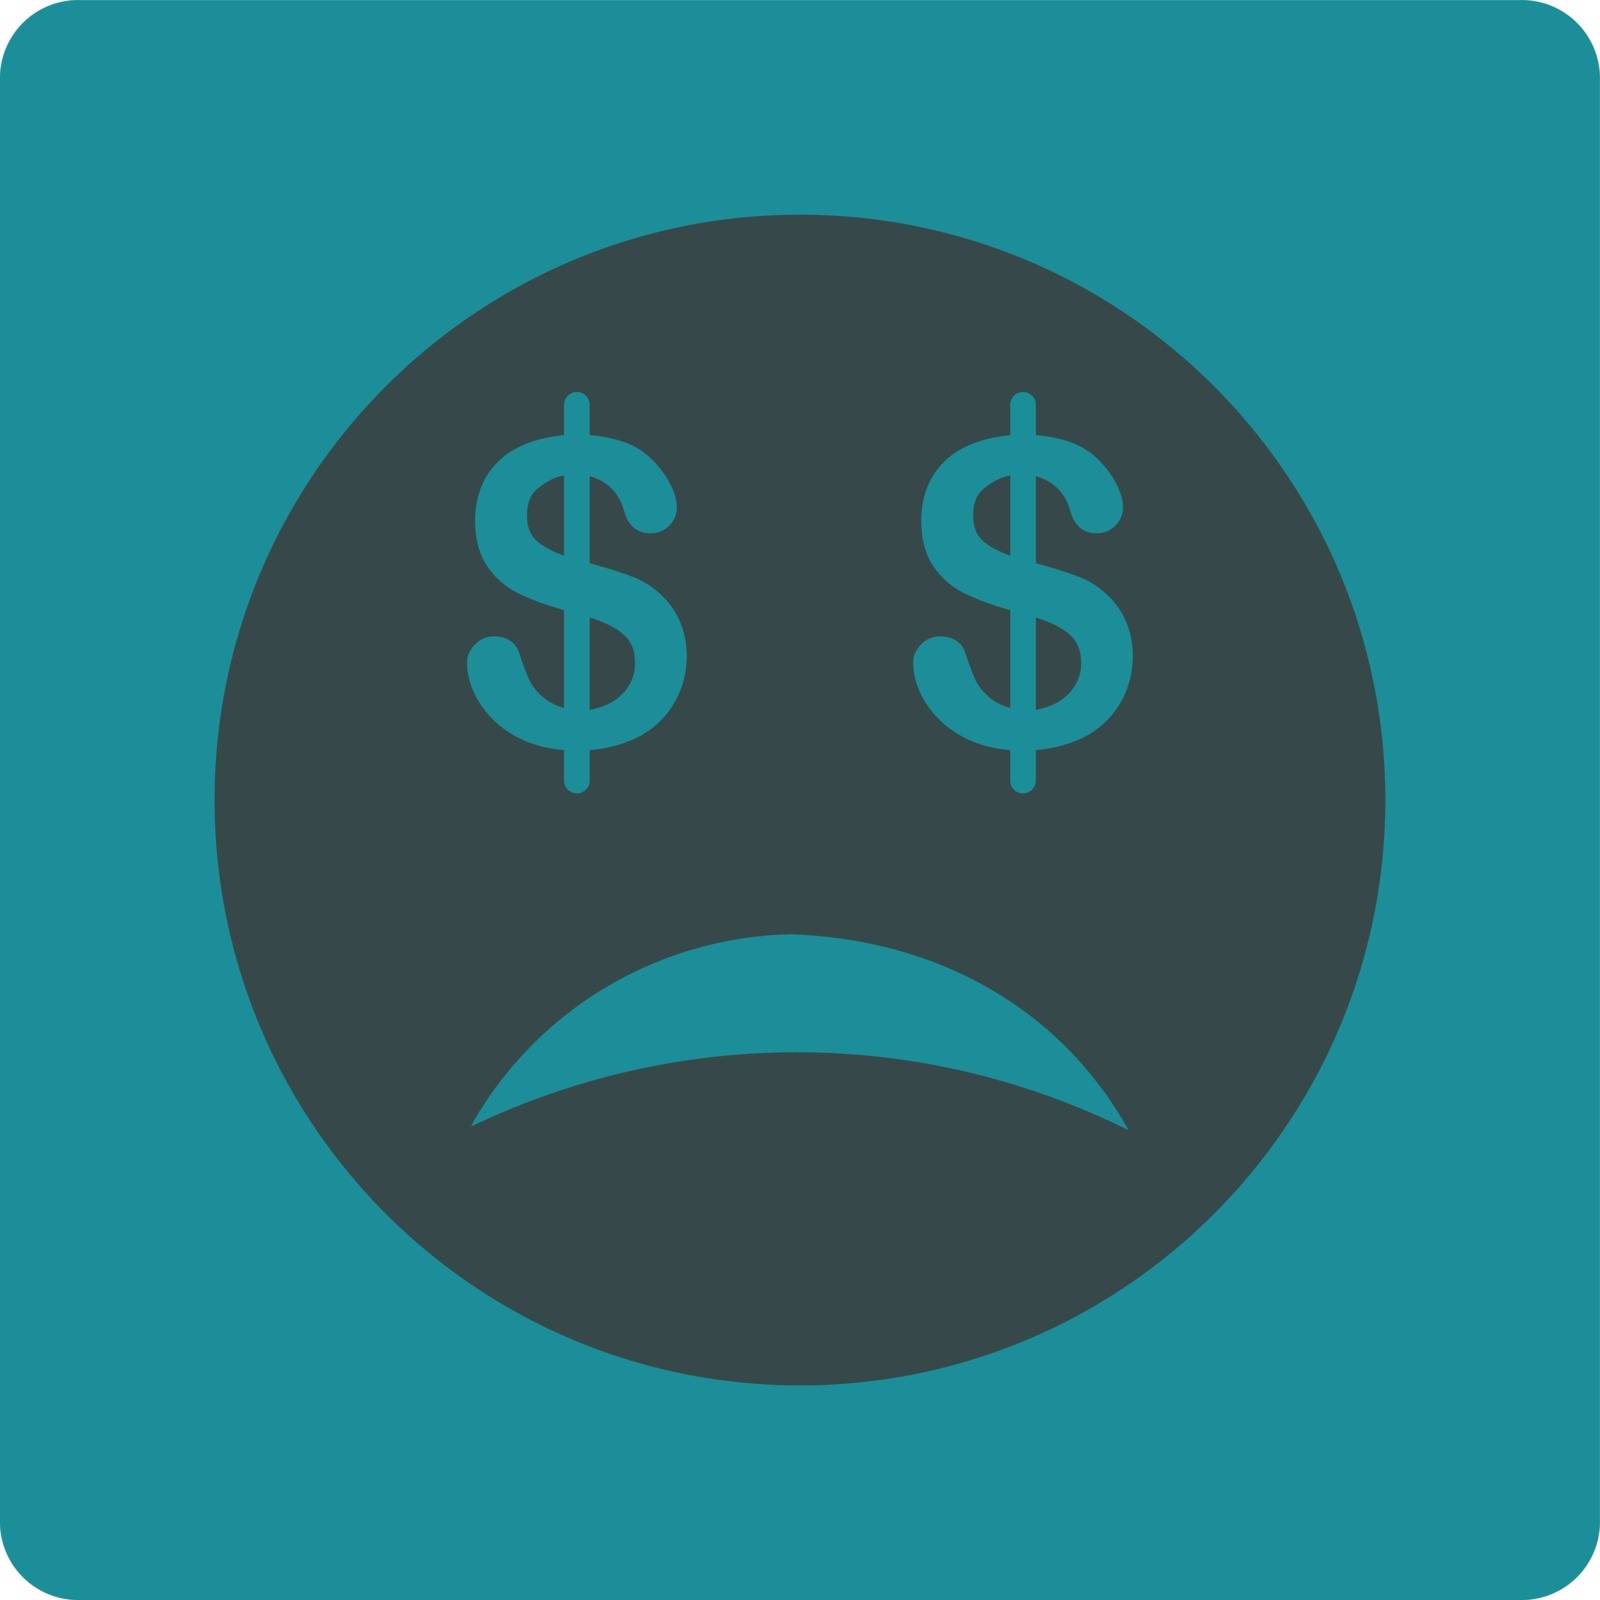 Bankrupt Smiley Icon by ahasoft